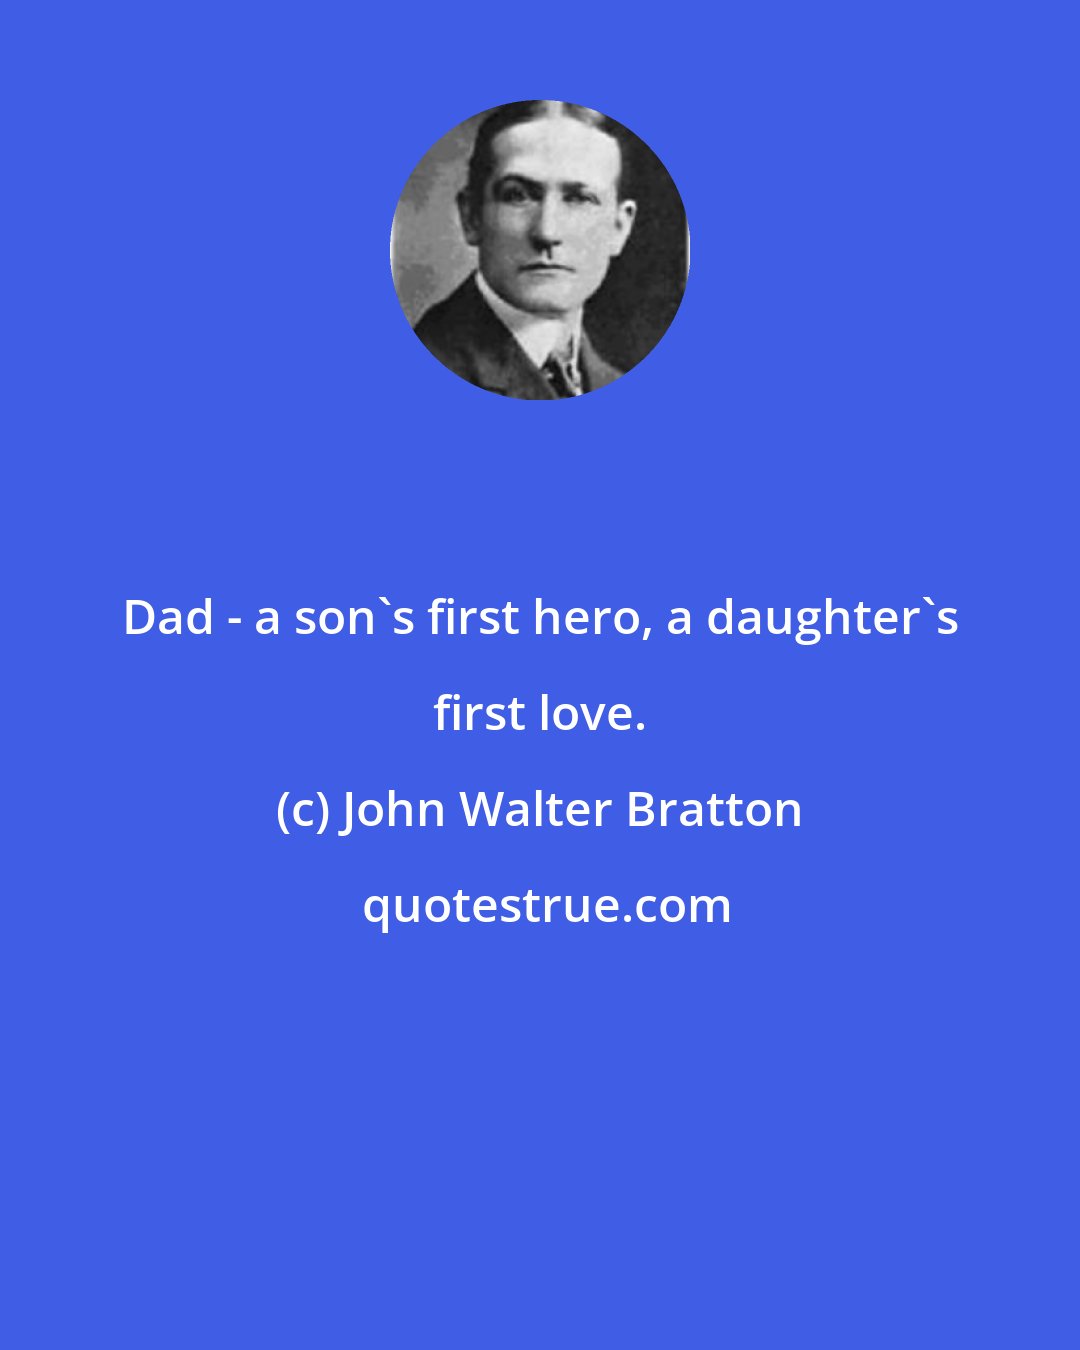 John Walter Bratton: Dad - a son's first hero, a daughter's first love.